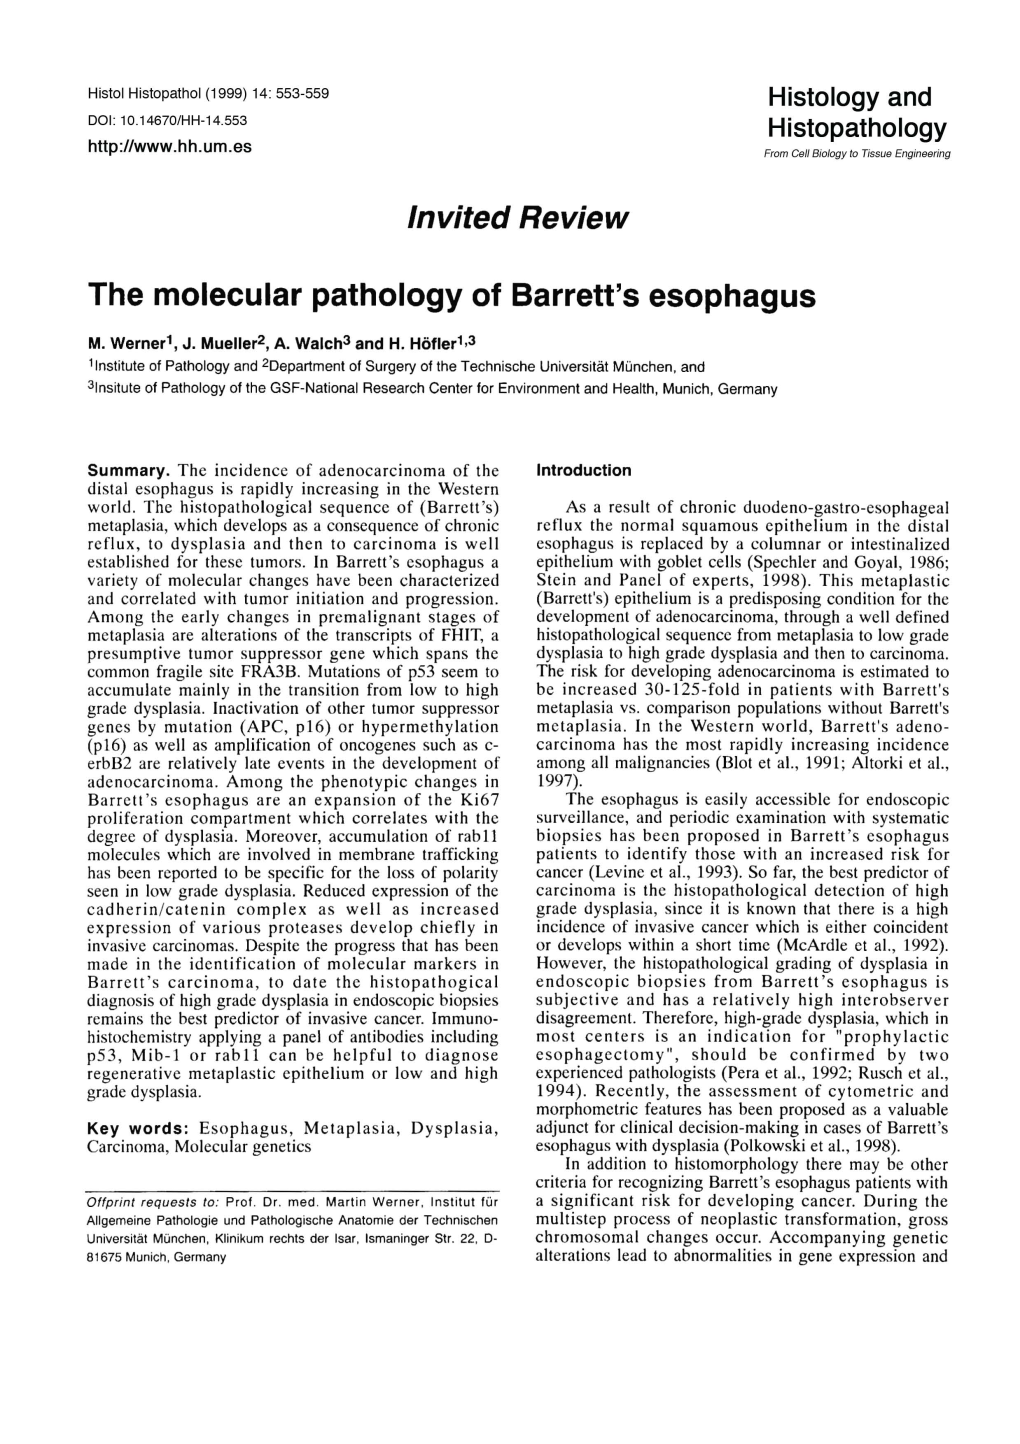 Invited Review the Molecular Pathology of Barrett's Esophagus